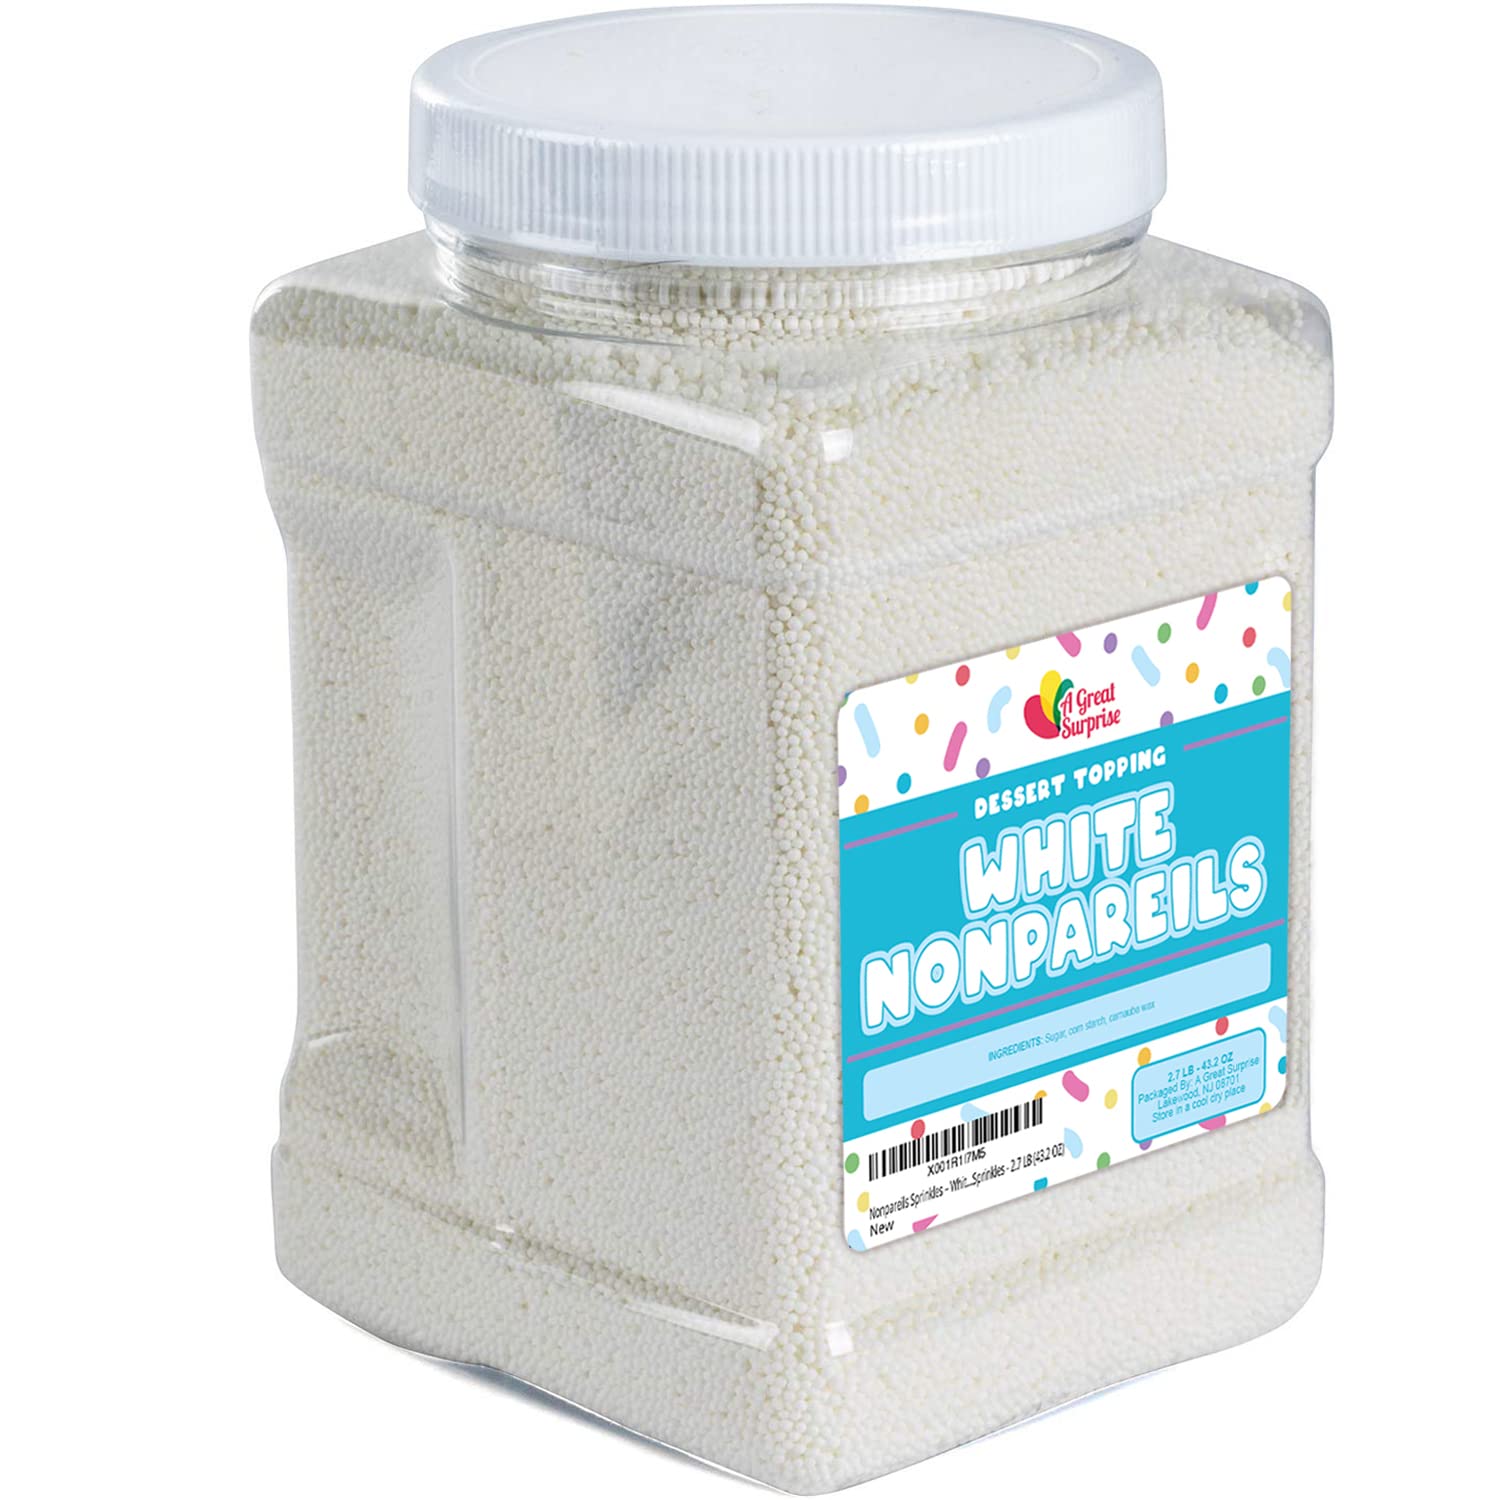 Yellow Sprinkles - 1.6 LB Bulk Dessert Toppings - Colorful Jimmies for  Baking - Yellow Sprinkles in Resealable Container - Spring, Summer Dessert